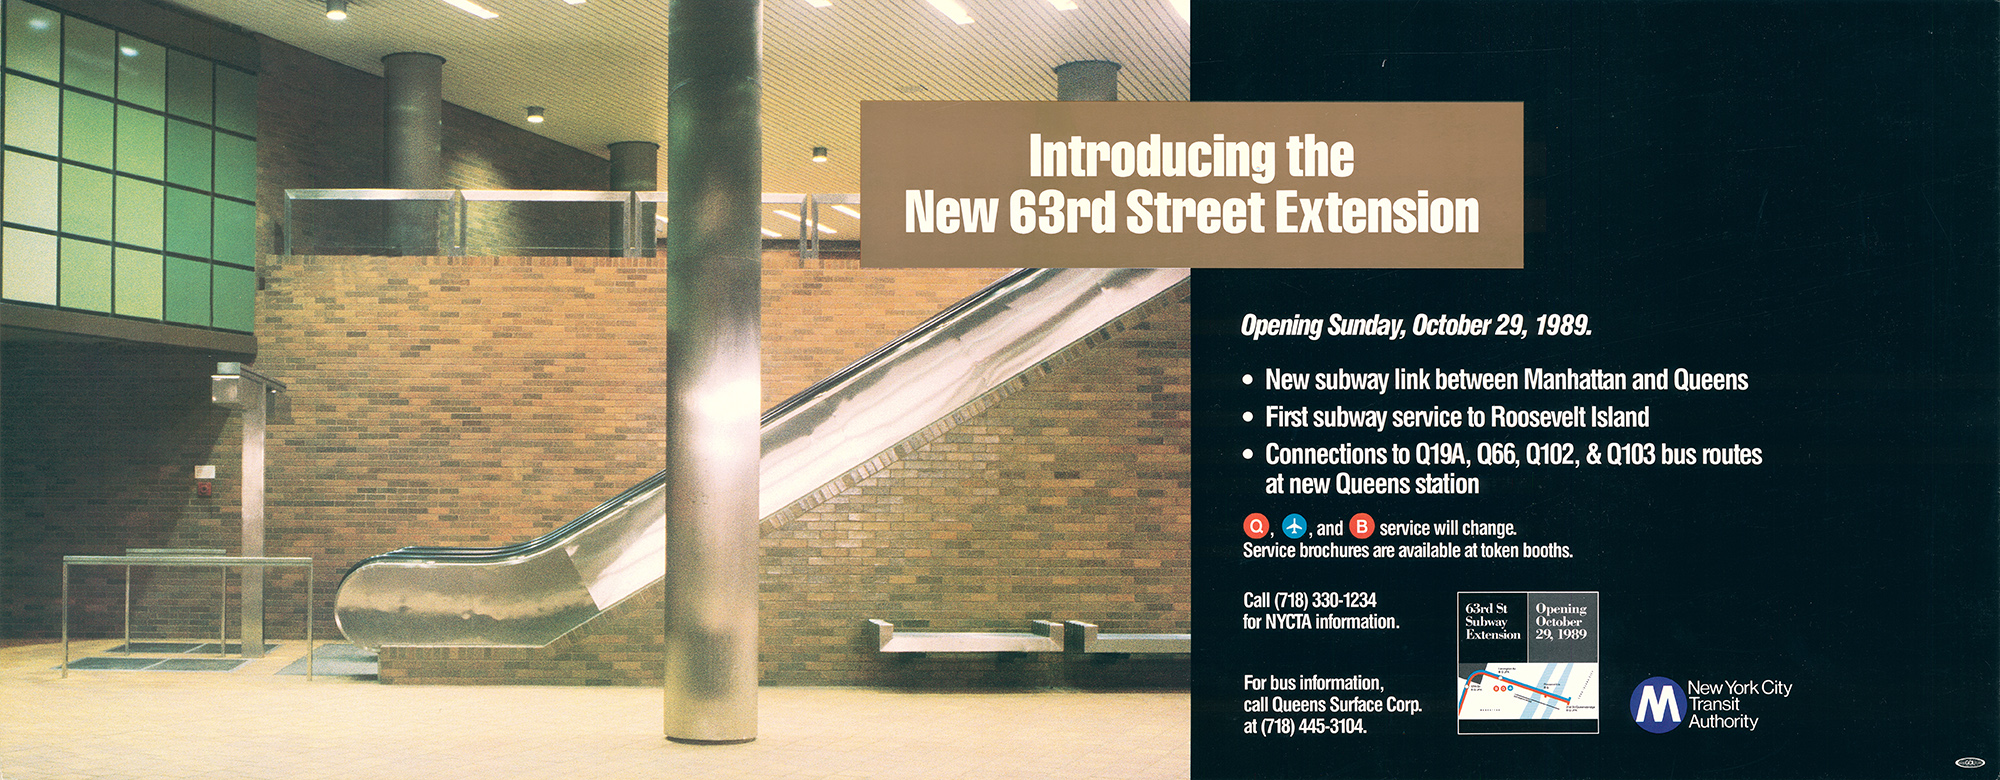 Introducing the New 63rd Street Extension, 1989